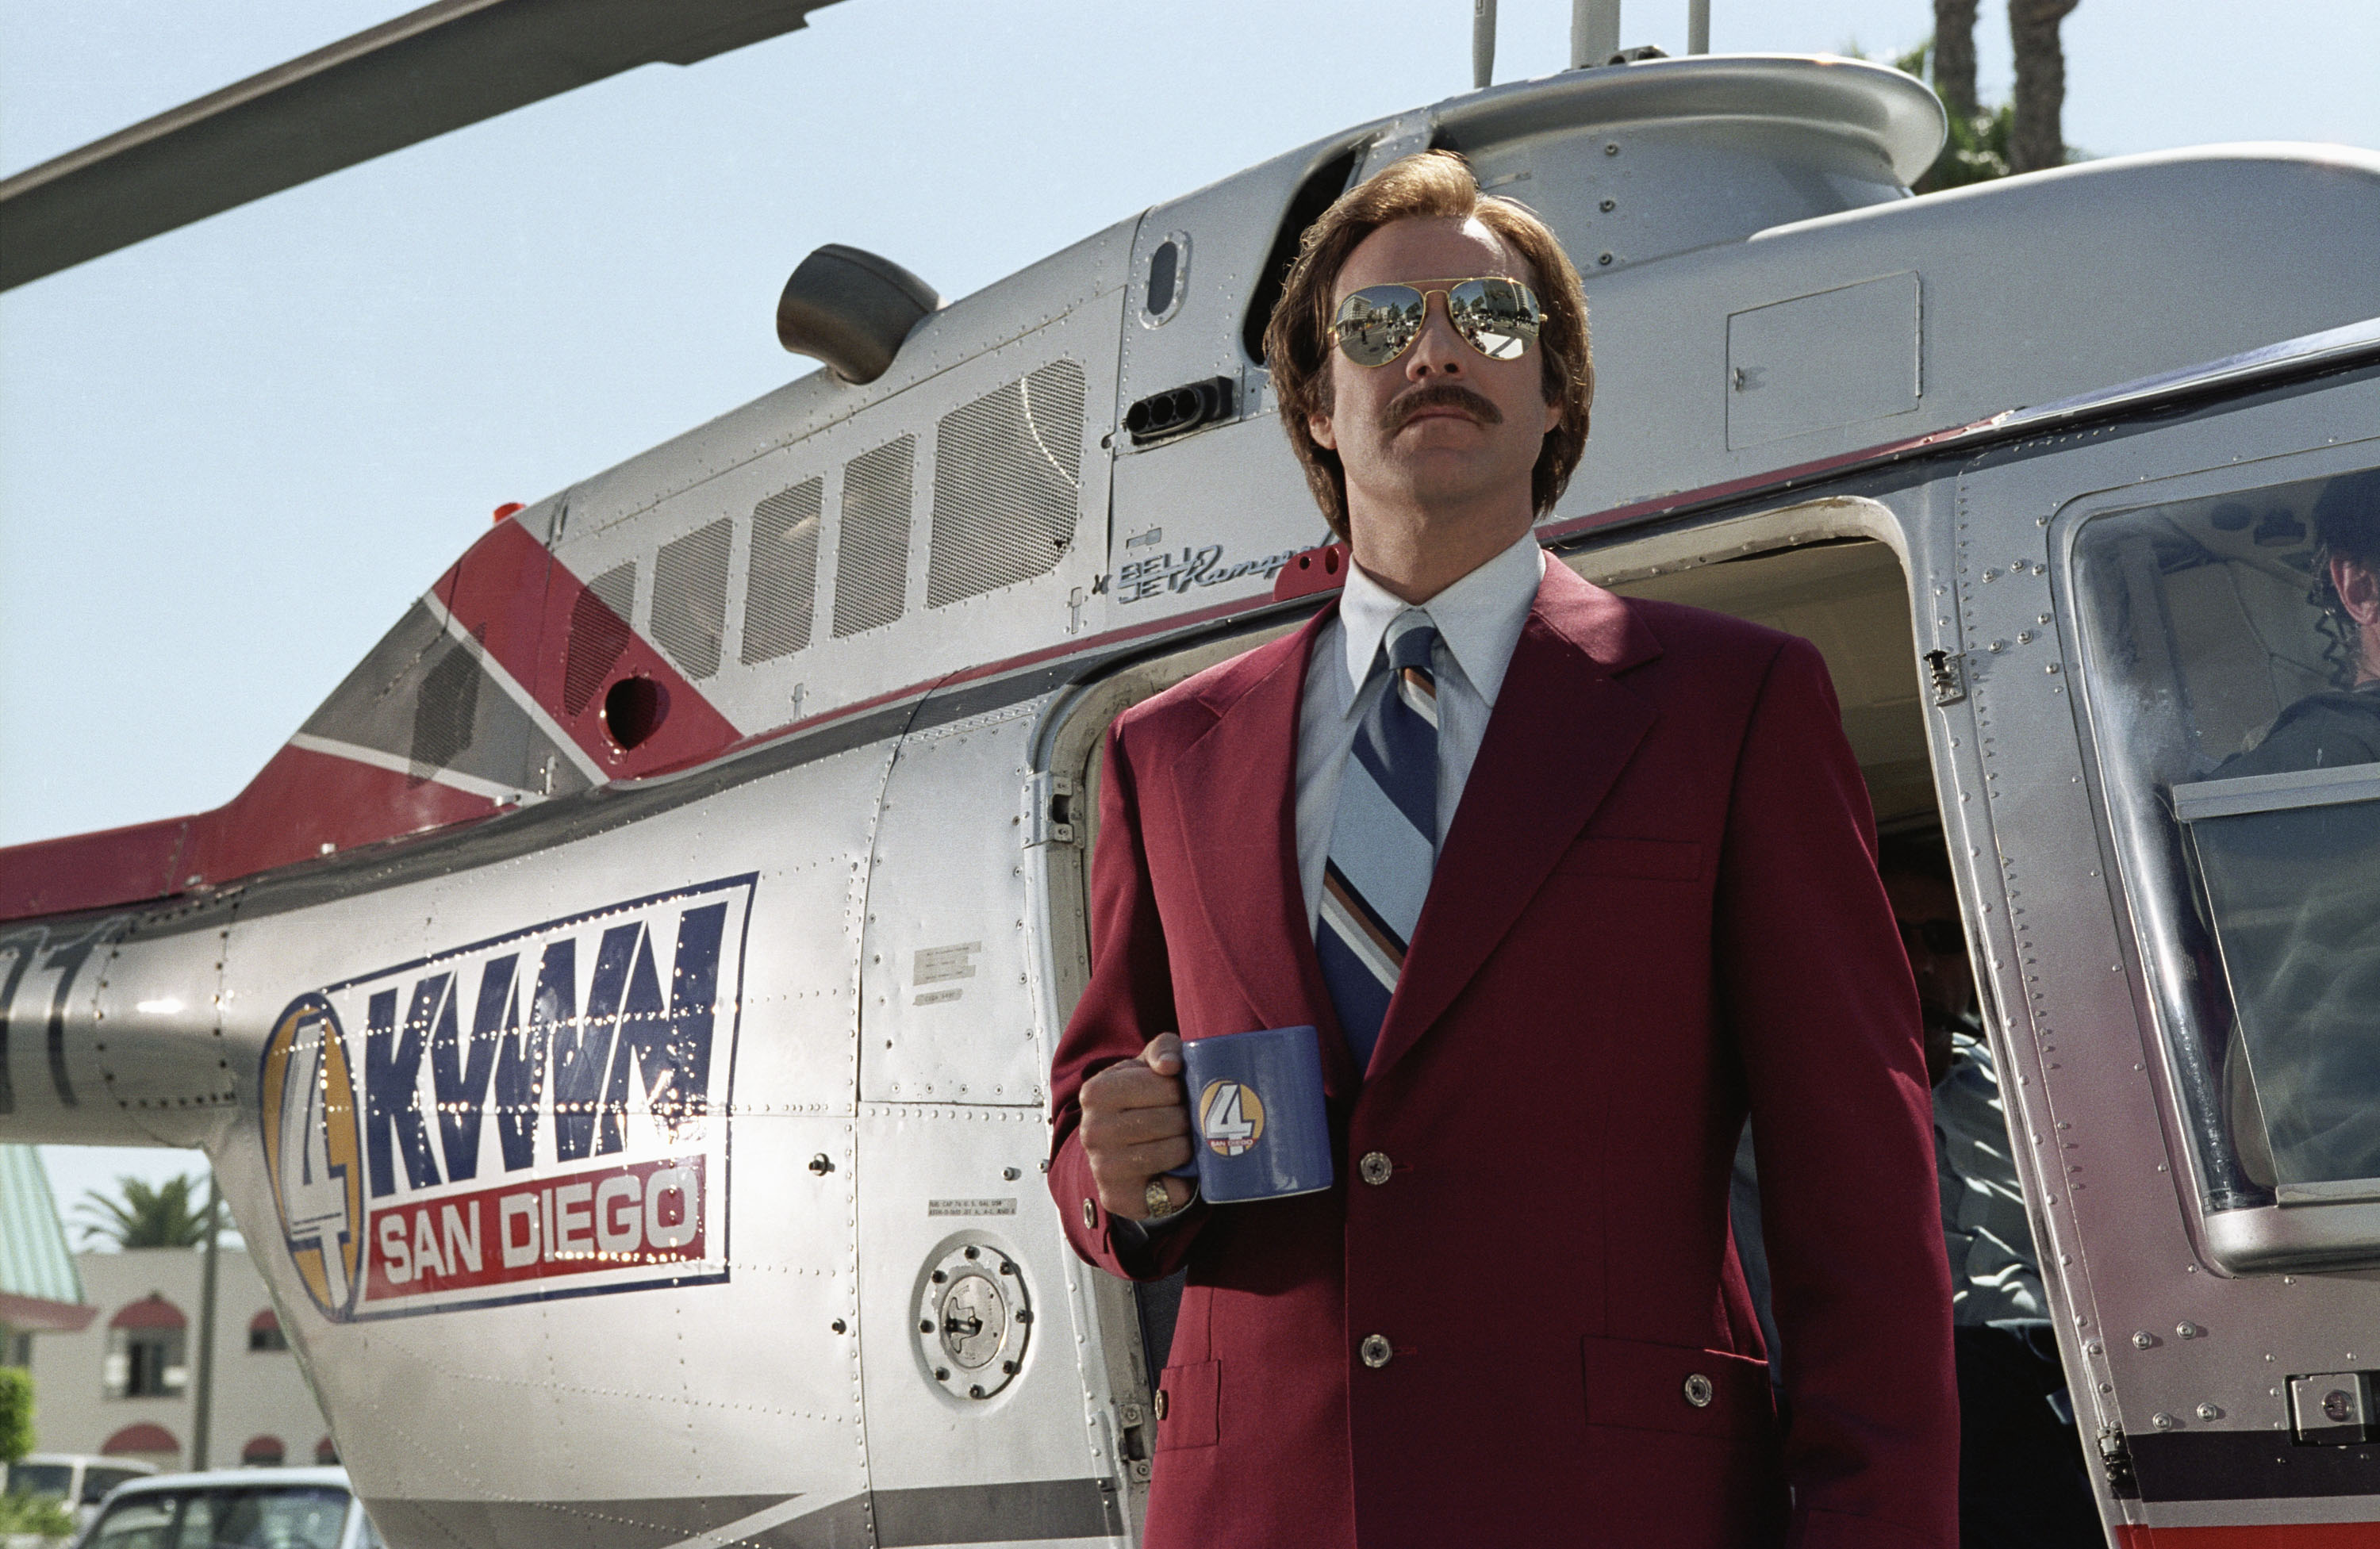 <p>Ron Burgundy is one of Will Ferrell's most iconic roles. "Anchorman: The Legend of Ron Burgundy" helped established Will as one of the funniest actors ever and created a Ron fandom nationwide. The 2004 movie -- which tells the story of a 1970s San Diego TV news anchor and his colleagues -- also grossed over $90.6 million worldwide on a $26 million budget!</p>